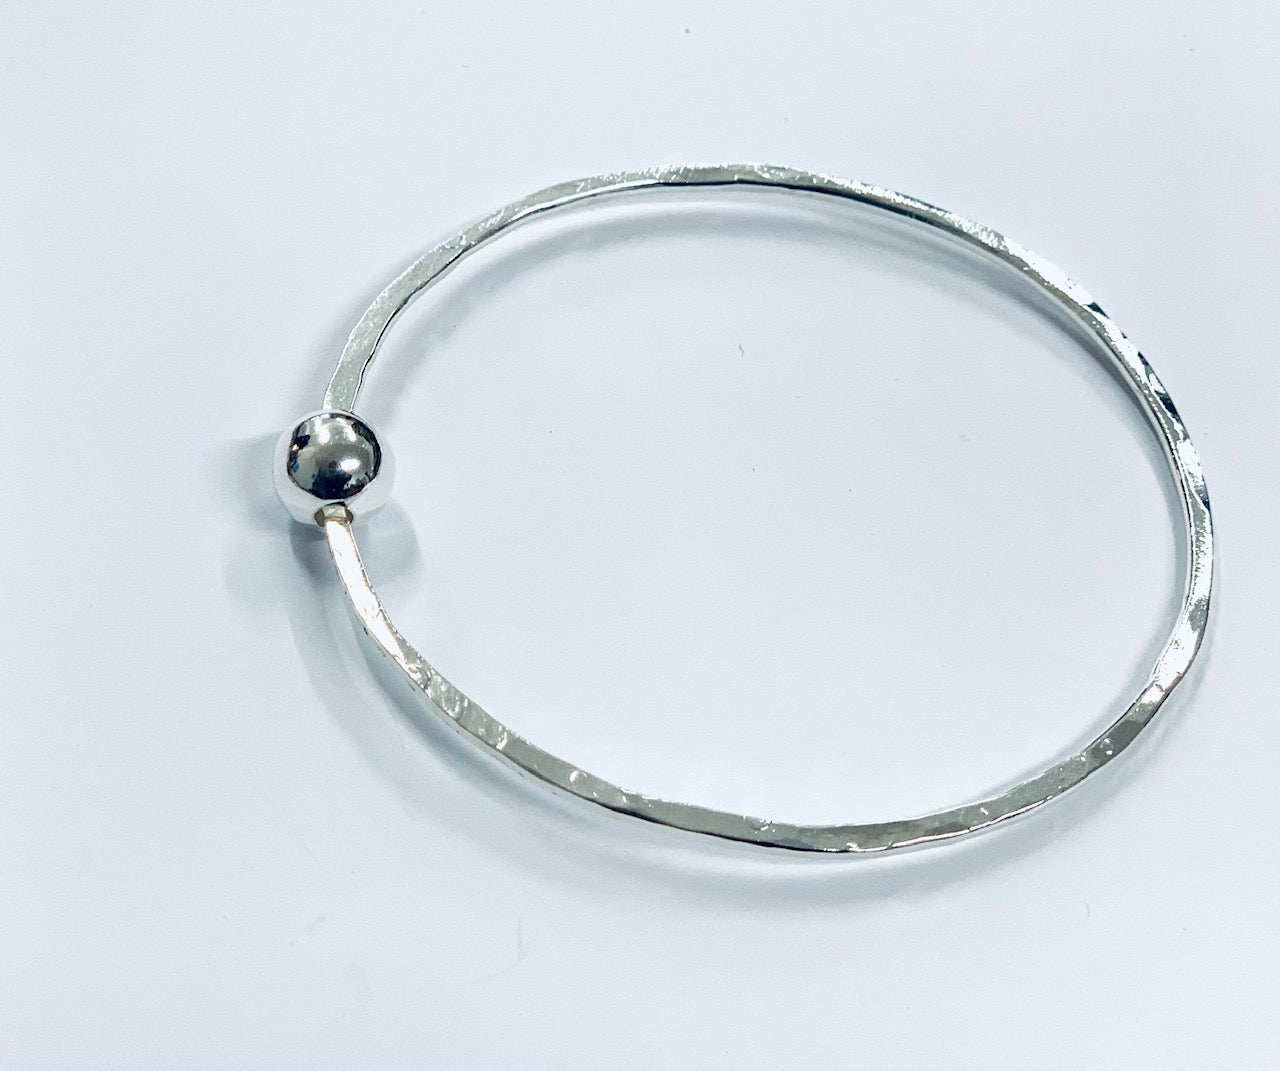 Thin silver bangle with round bead